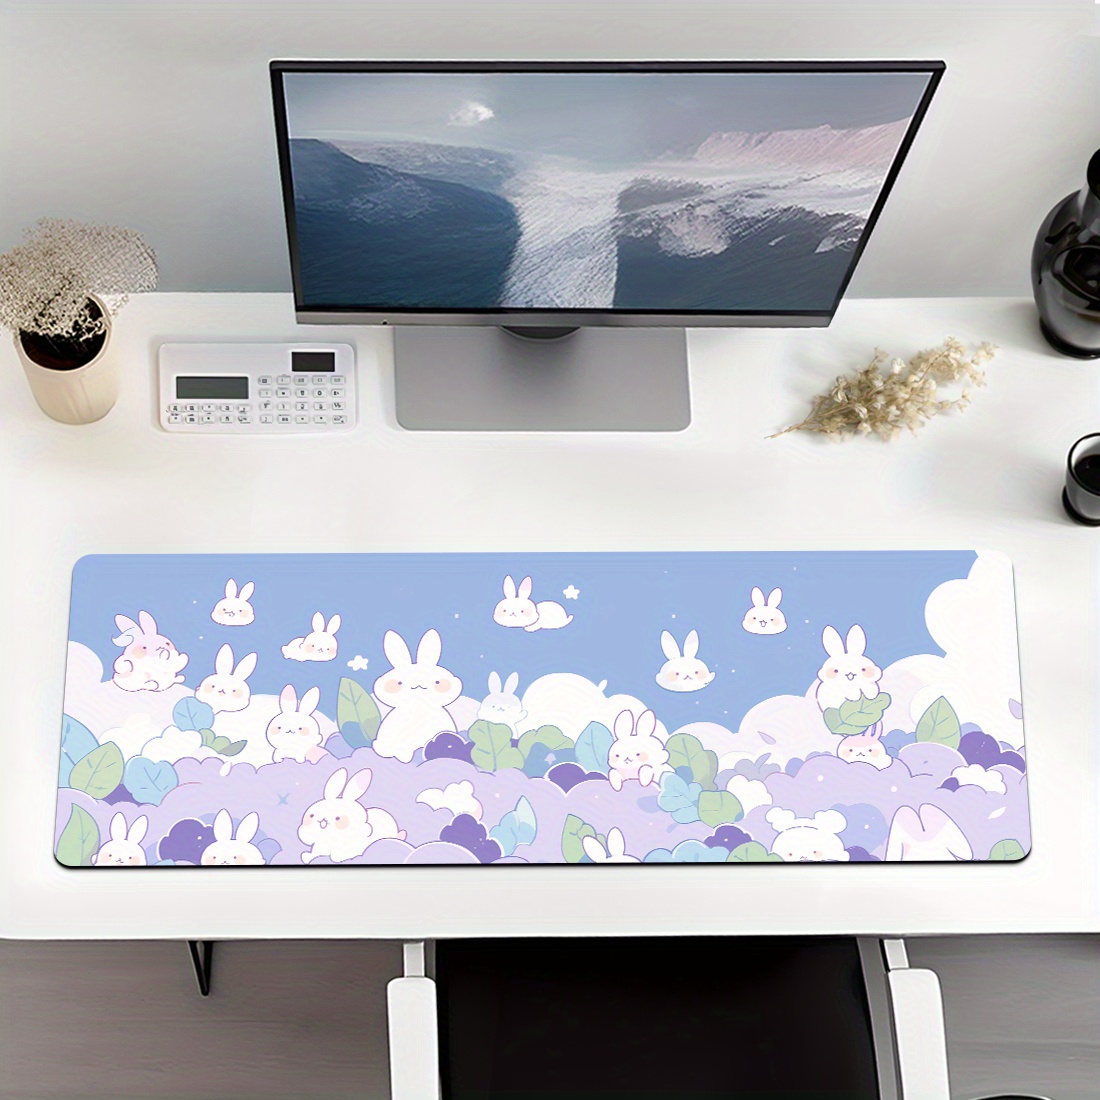 

1pc Large Sky Bunny Anime Desk Mouse Pad, Oblong Natural Rubber Non-slip Office Home Computer Accessory Mat (31.5in X 11.8in)